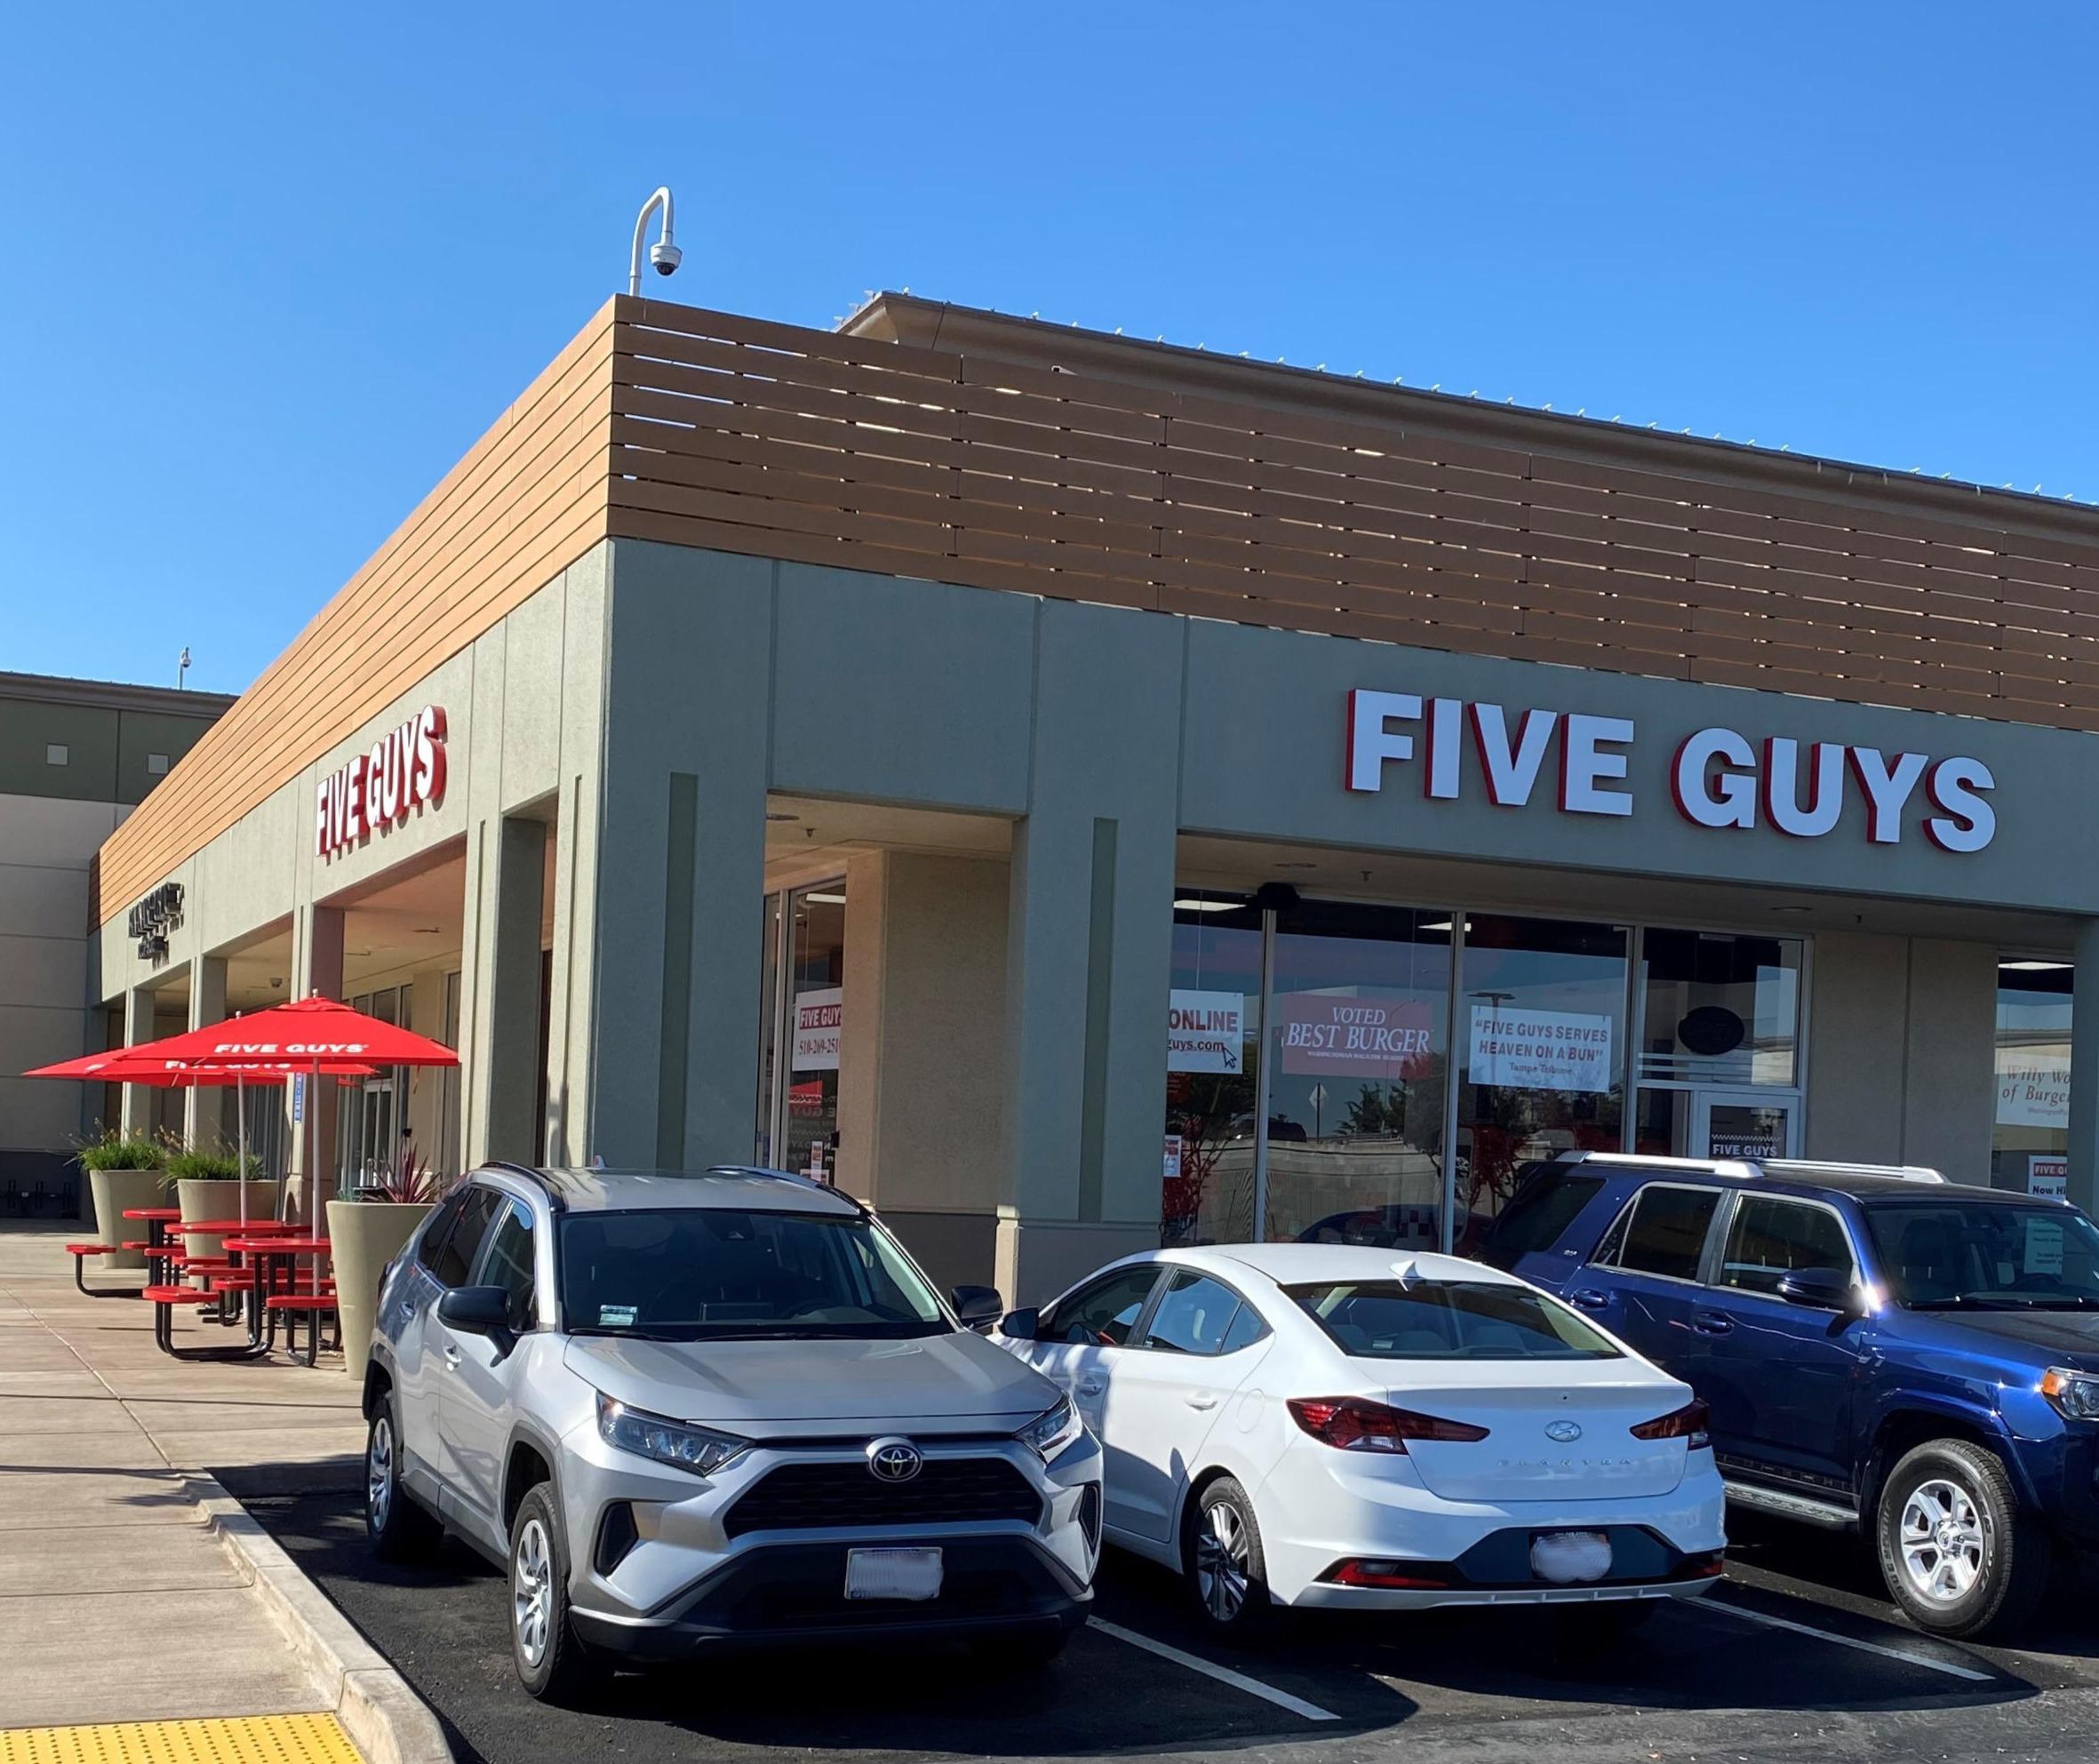 Exterior photograph of the entrance to the Five Guys restaurant at 1201 Marina Boulevard in San Leandro, California.